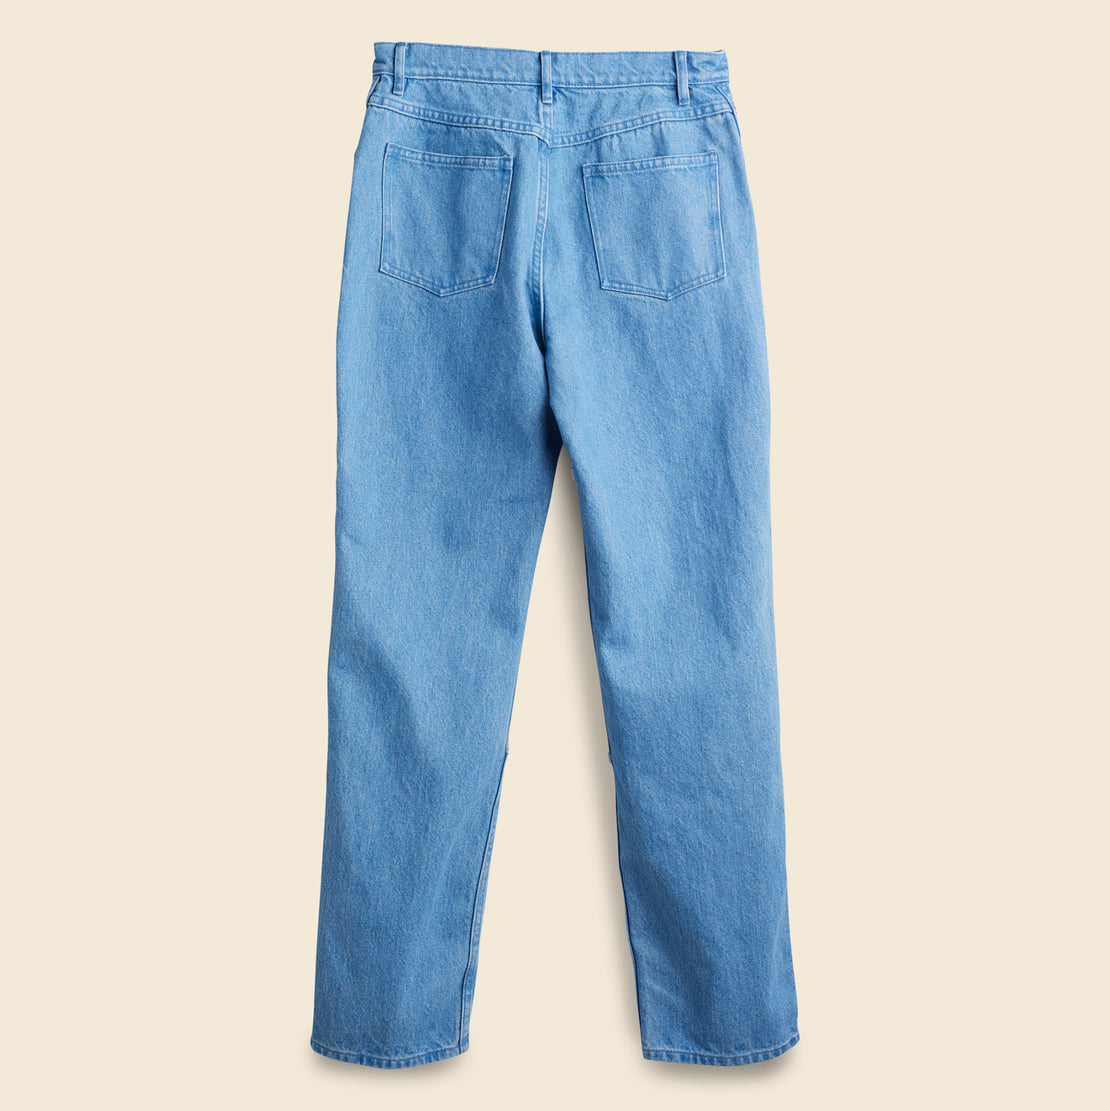 Two-Tone Jeans - Big Sky - Carleen - STAG Provisions - W - Pants - Denim